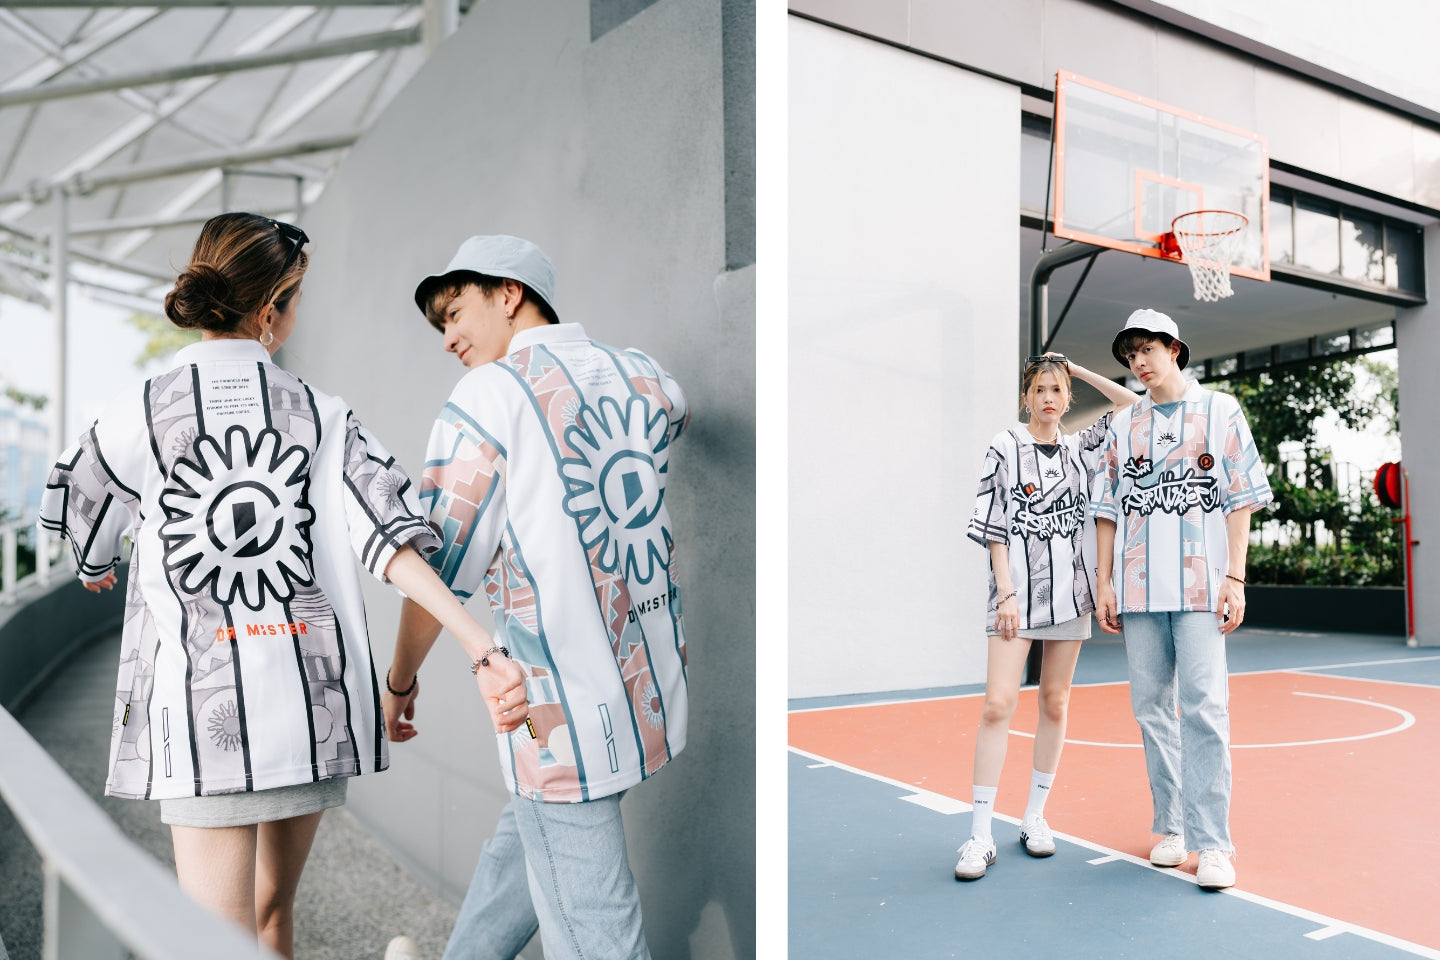 23 – STAR OF DAYS: SWAY YOURSELF IN A SUN-FASHIONED STREETWEAR COLLECTION